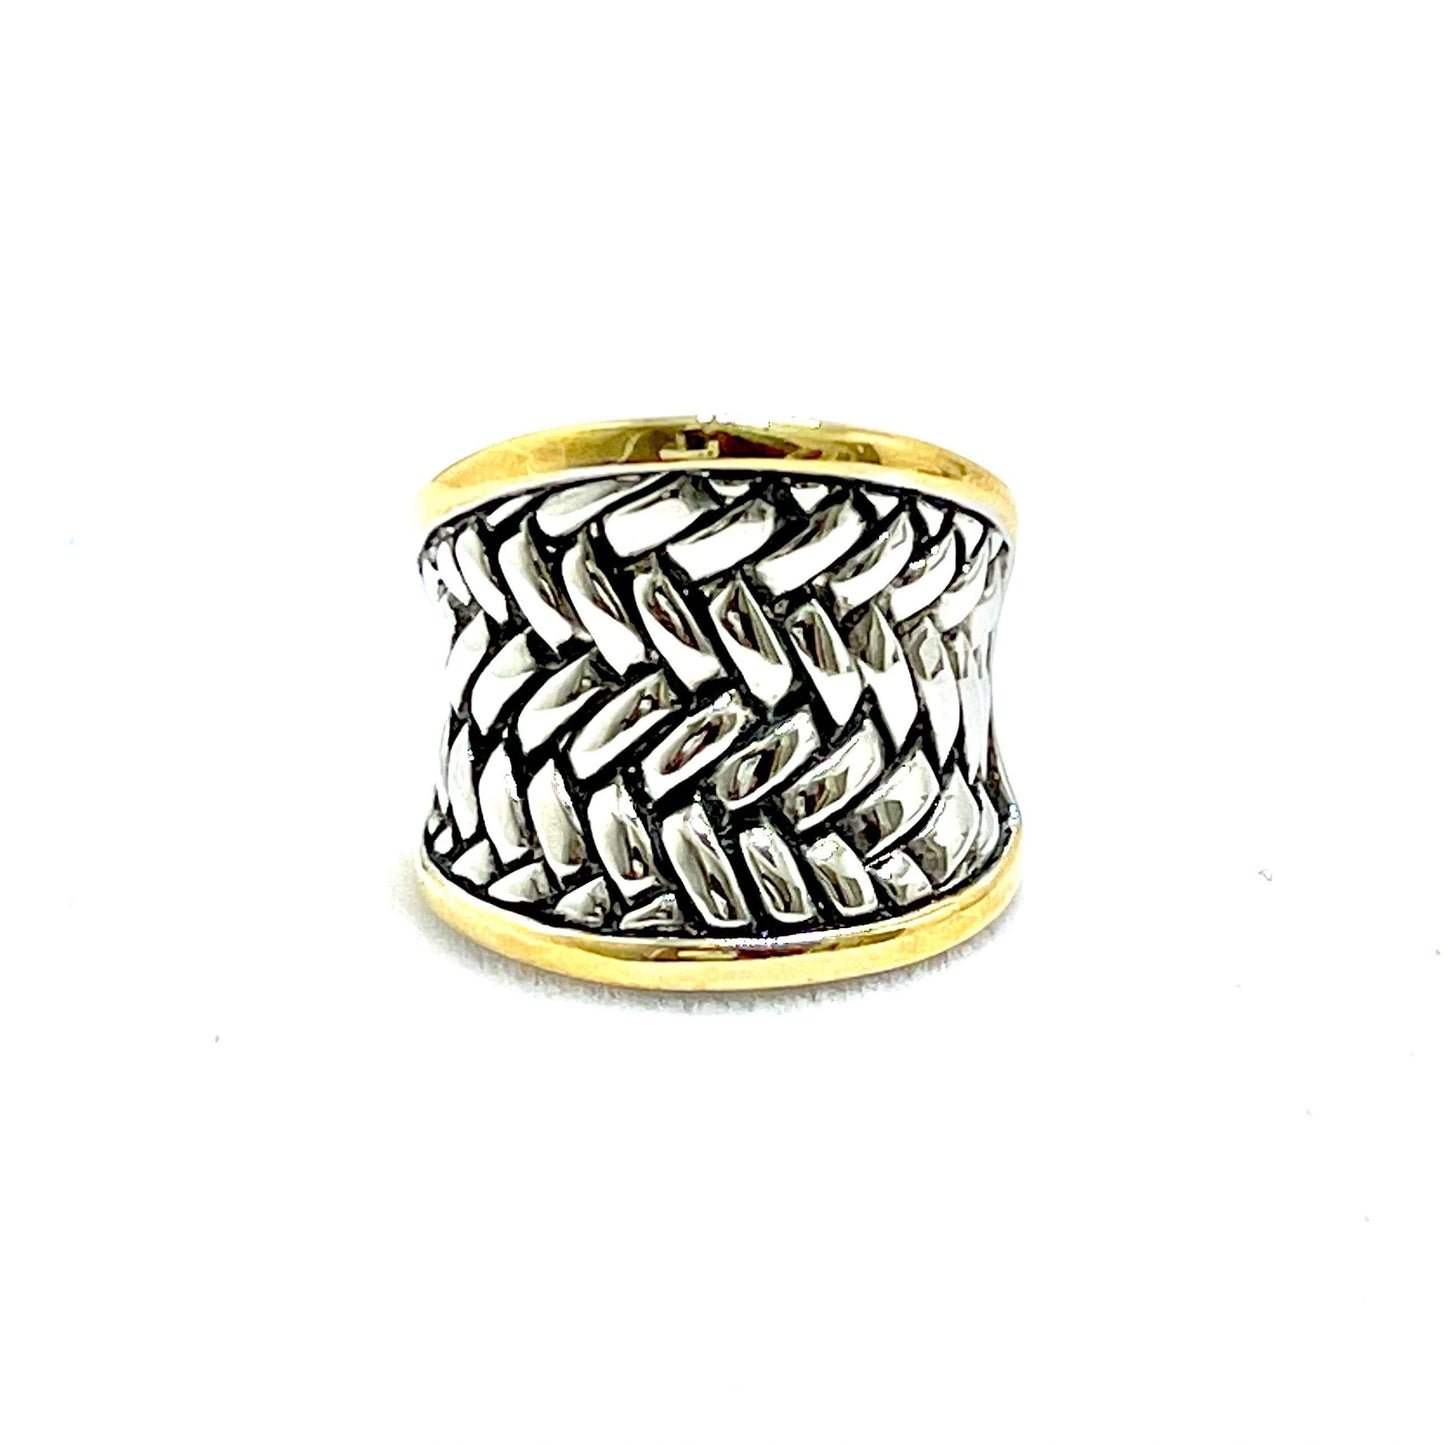 Cable Design Inspired Rings